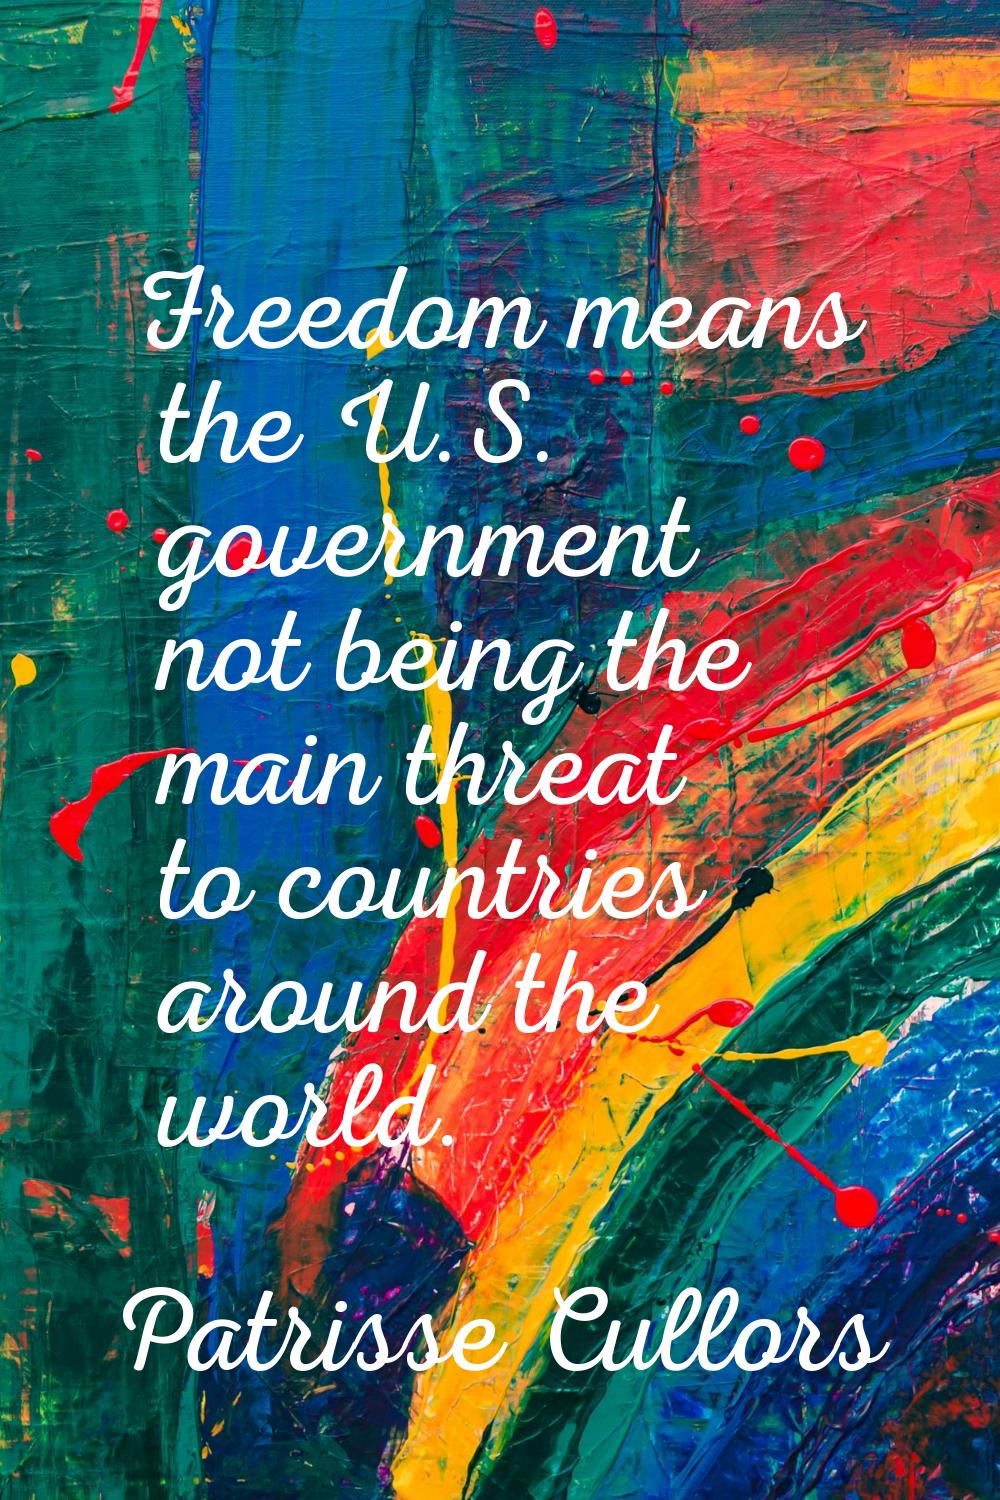 Freedom means the U.S. government not being the main threat to countries around the world.